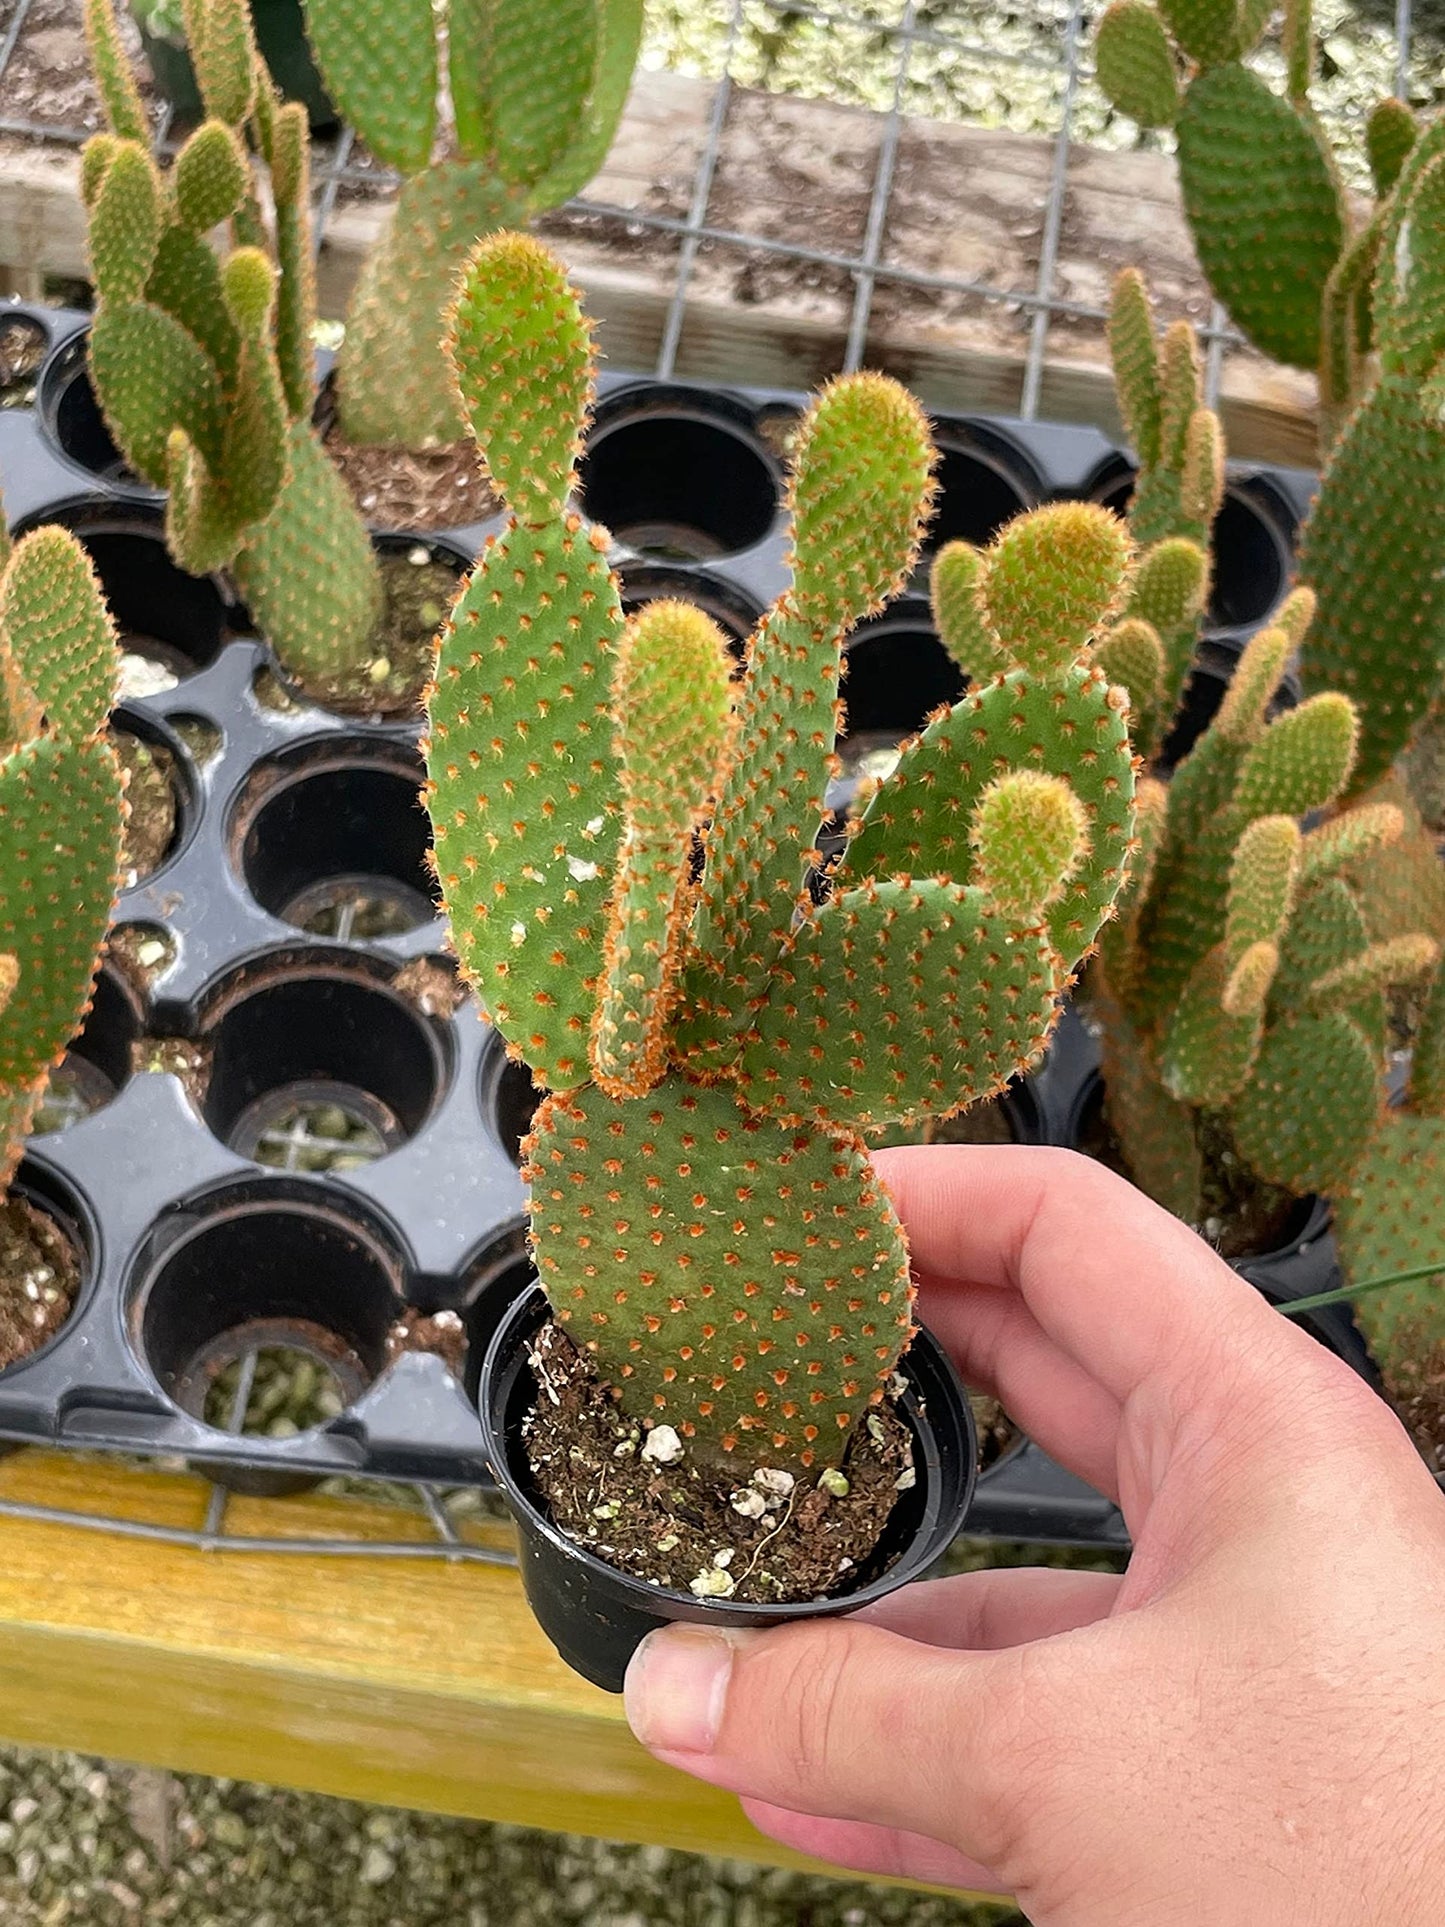 Bunny-Ears Prickly-pear Copper Red, Opuntia microdasys, Large Bunny Ears Prickly Pear with Copper Fuzz and Red Areoles in 2 inch Pot,